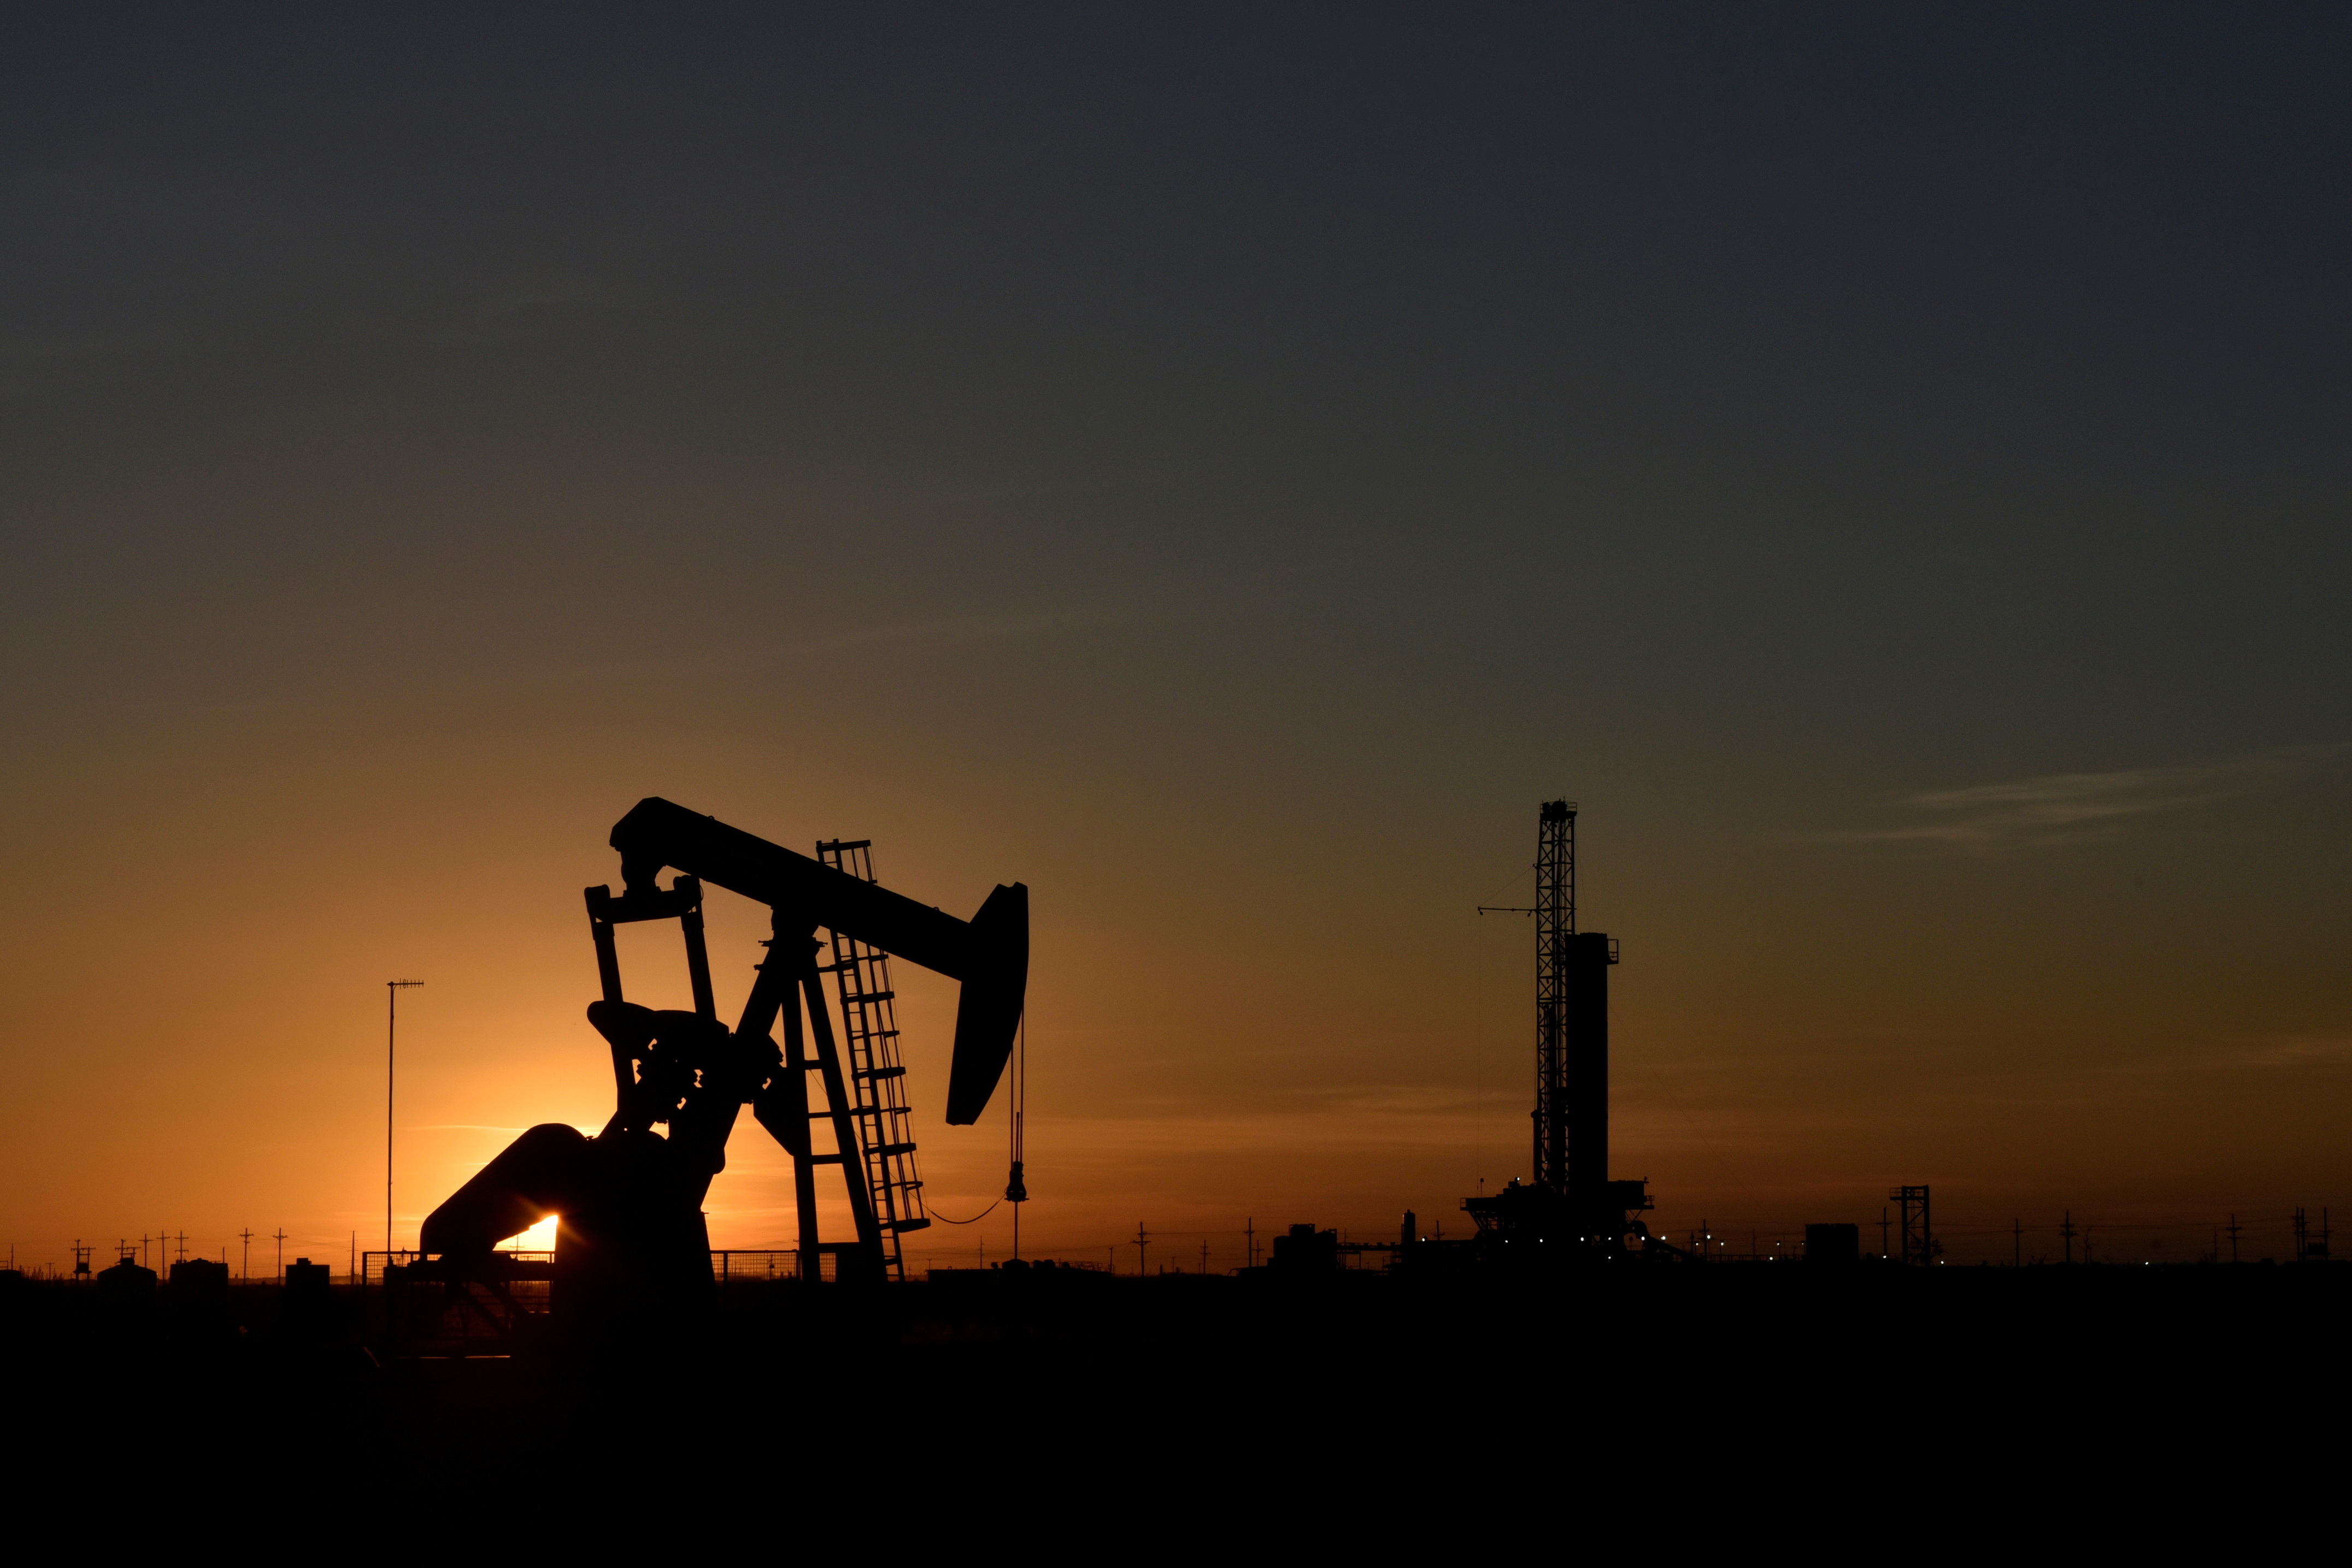 A pump jack operates in front of a drilling rig at sunset in an oil field in Midland, Texas U.S. August 22, 2018. REUTERS/Nick Oxford/File Photo